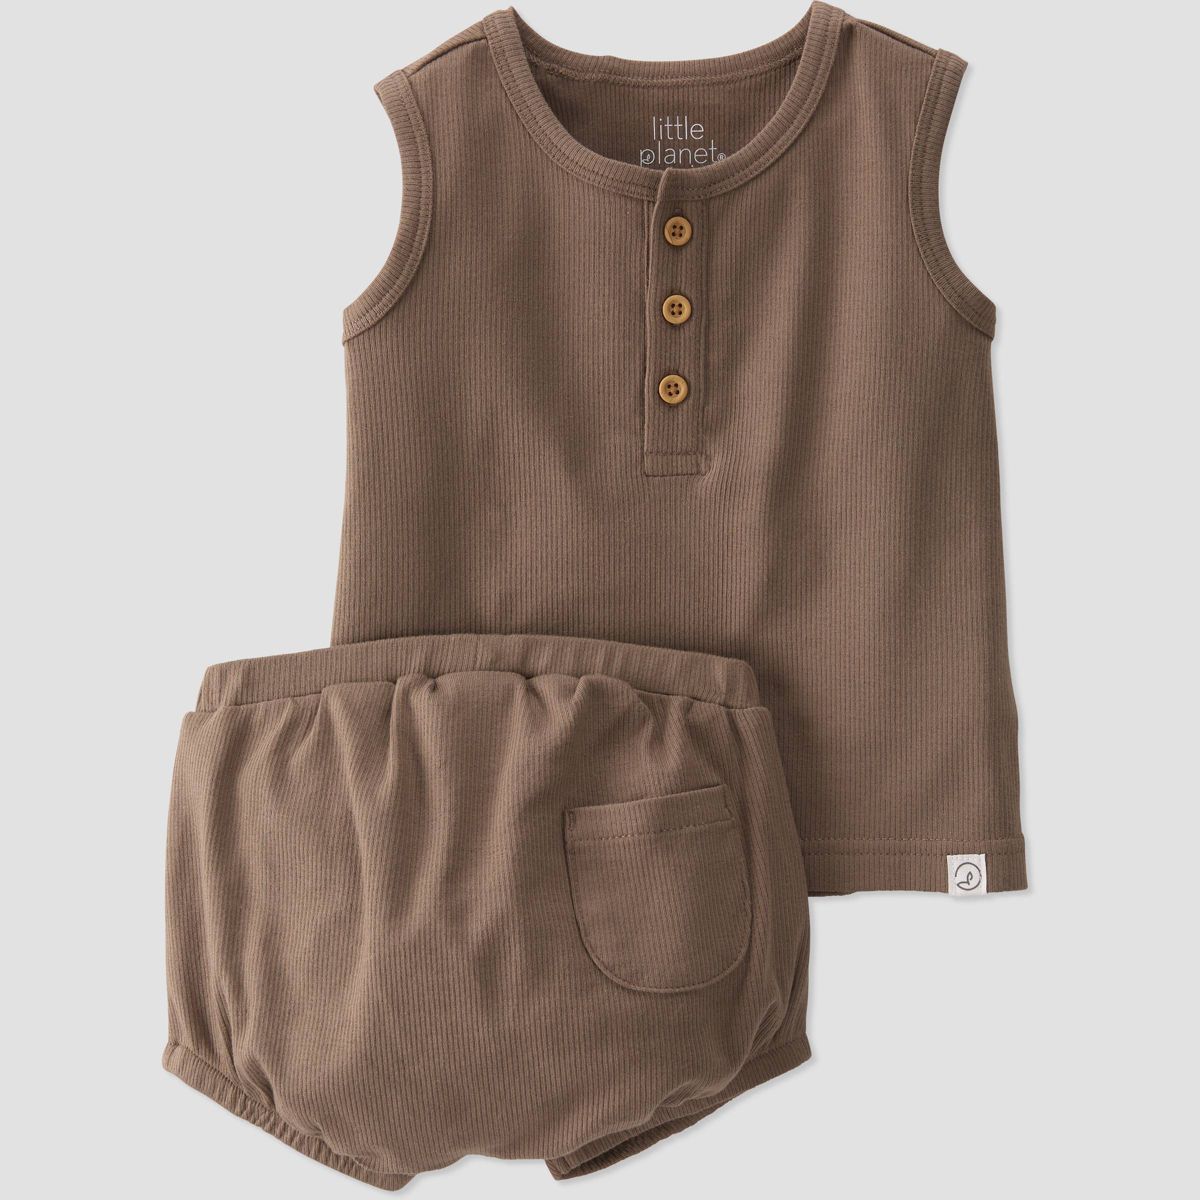 little Planet By Carter's Baby 2pc Happy Otter Top and Bottom Set - Brown | Target